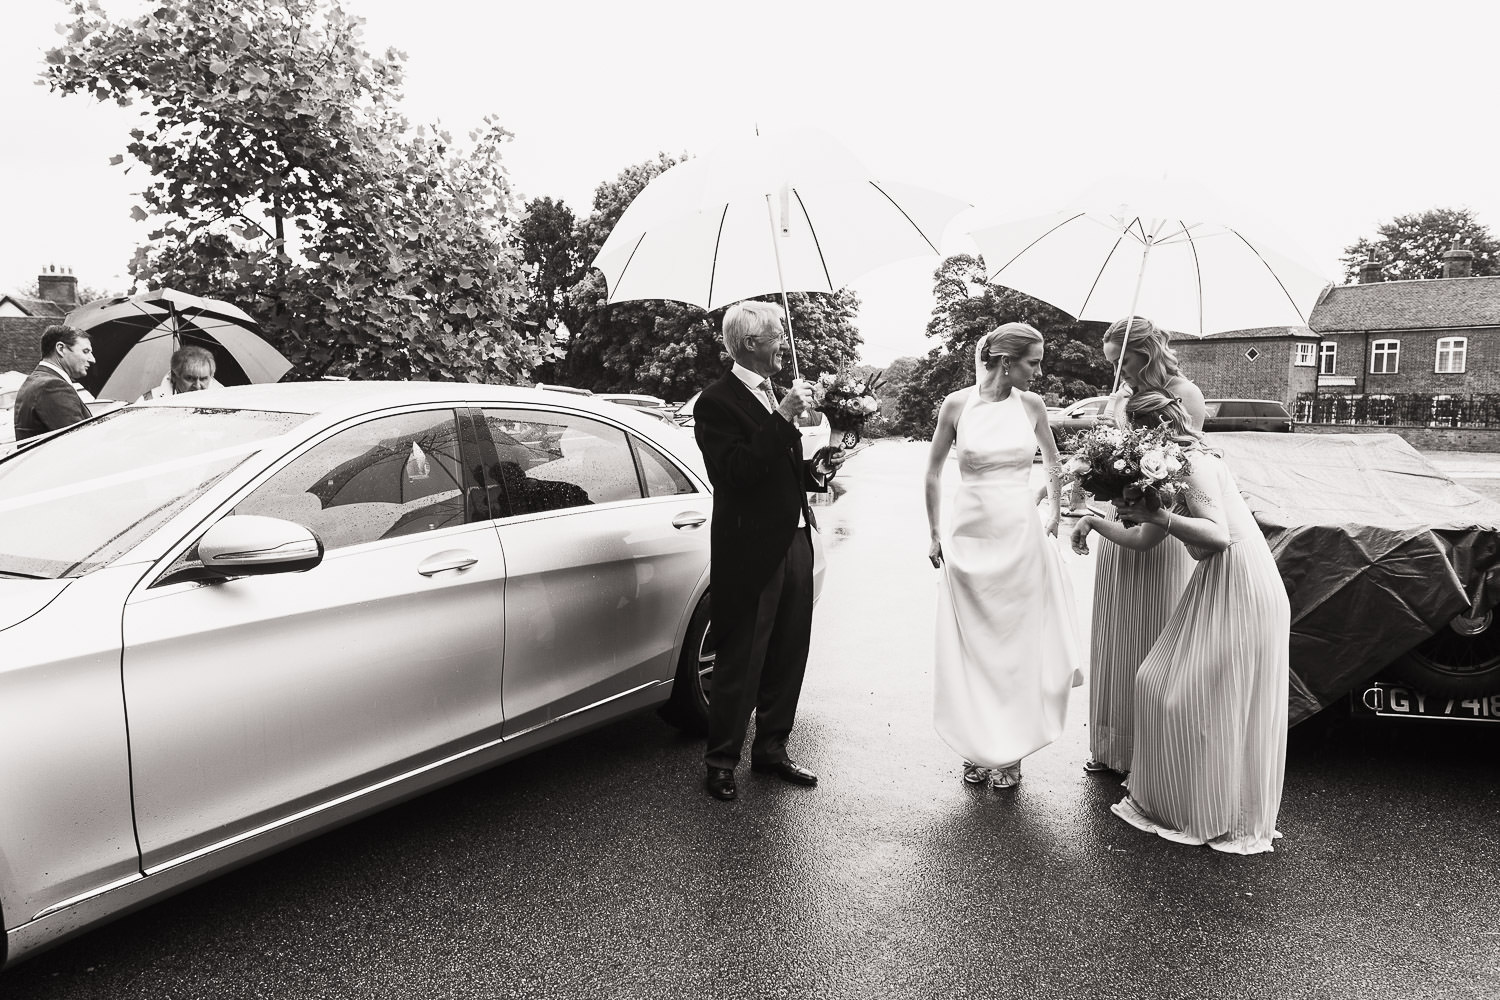 A bride wearing Jesus Peiro 260 dress from Miss Bush is outside the church in Danbury Essex. It is raining and her dad and bridesmaid hold an umbrella. Documentary style Essex wedding photographer.